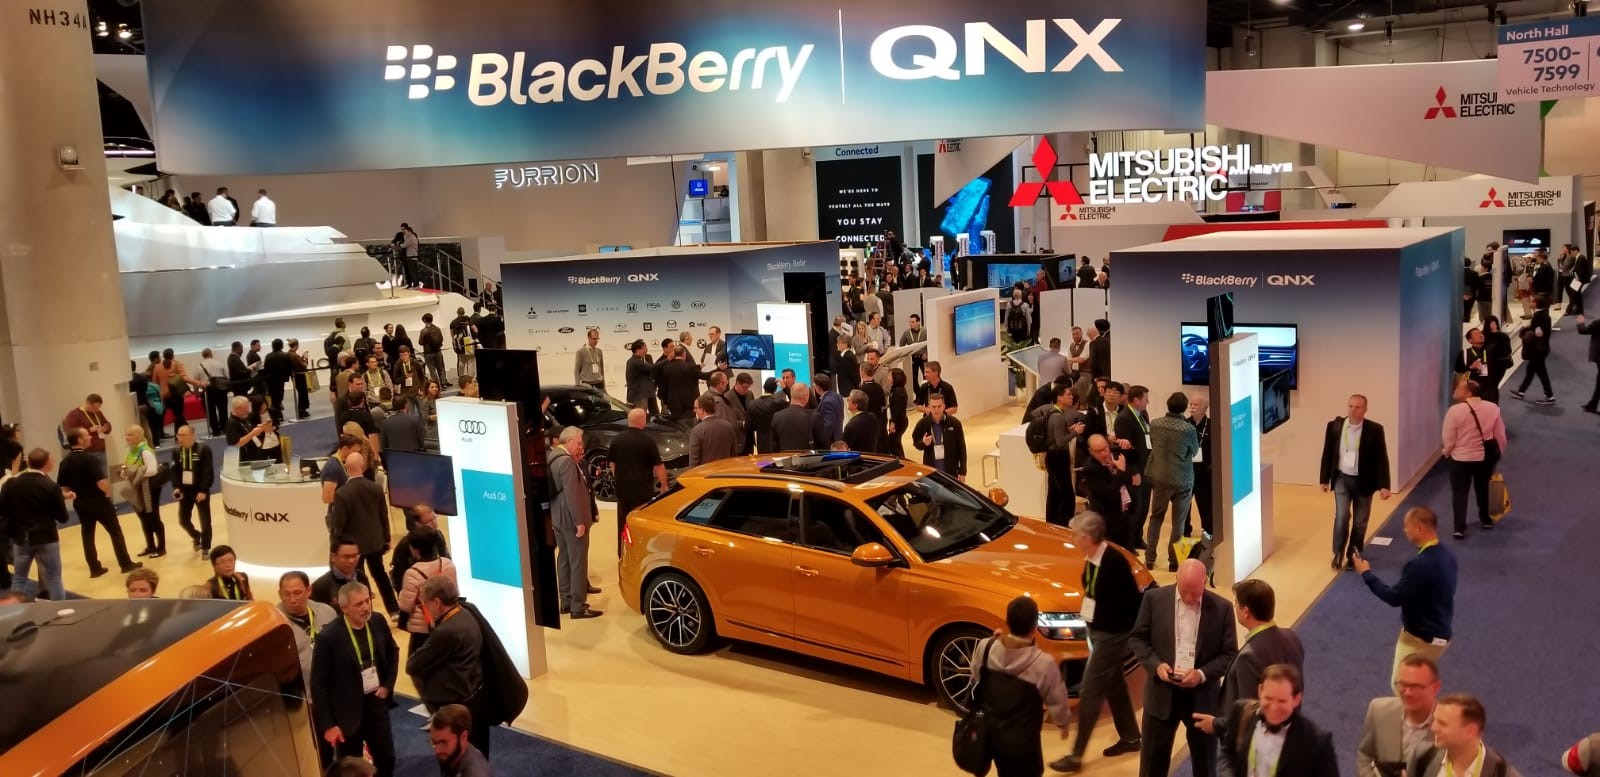 BlackBerry QNX highlighted its new QNX Platform for digital cockpits in two vehicles as CES 2019.